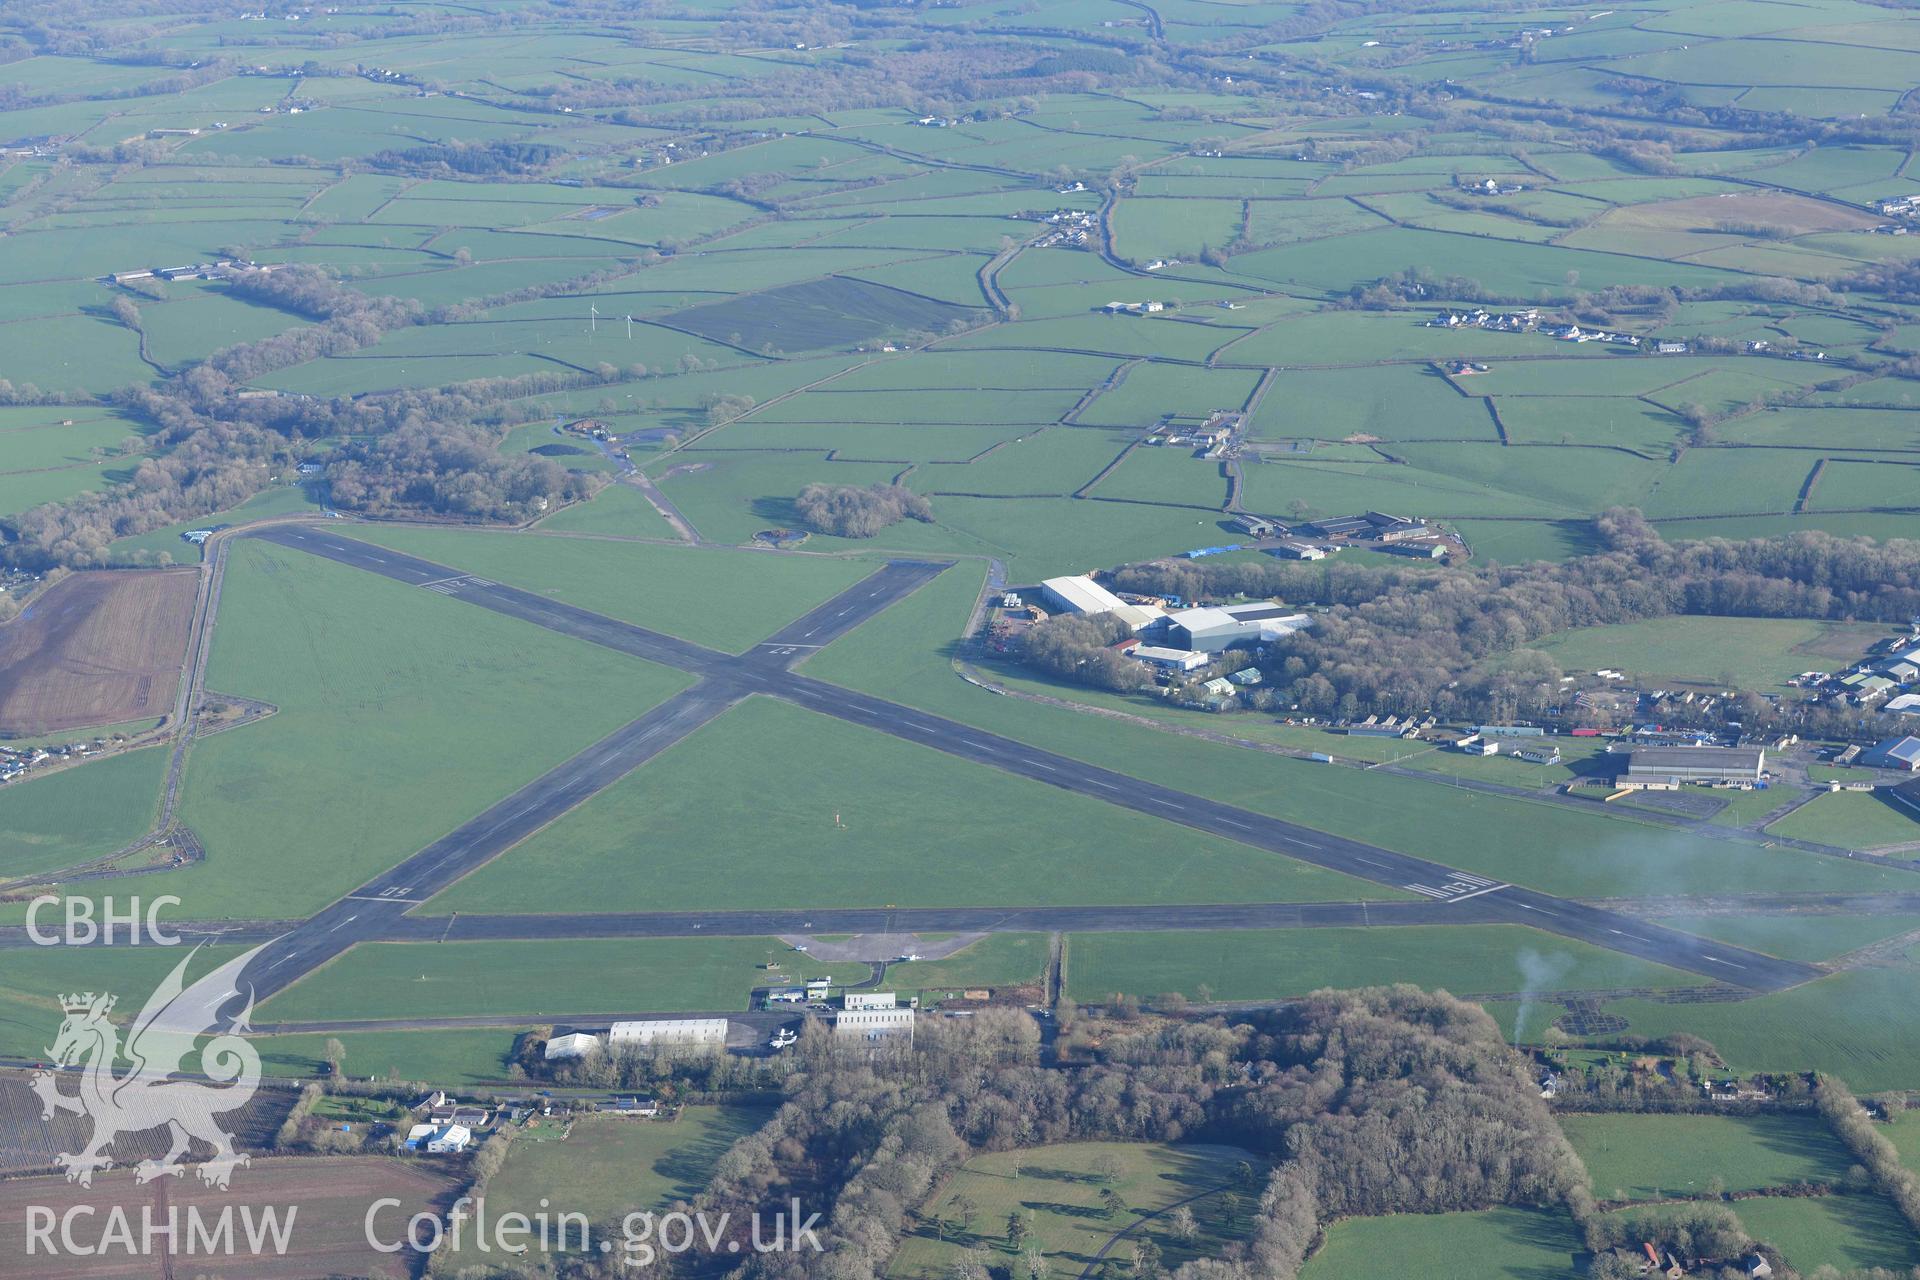 Oblique aerial photograph of Haverfordwest Airport taken during the Royal Commission